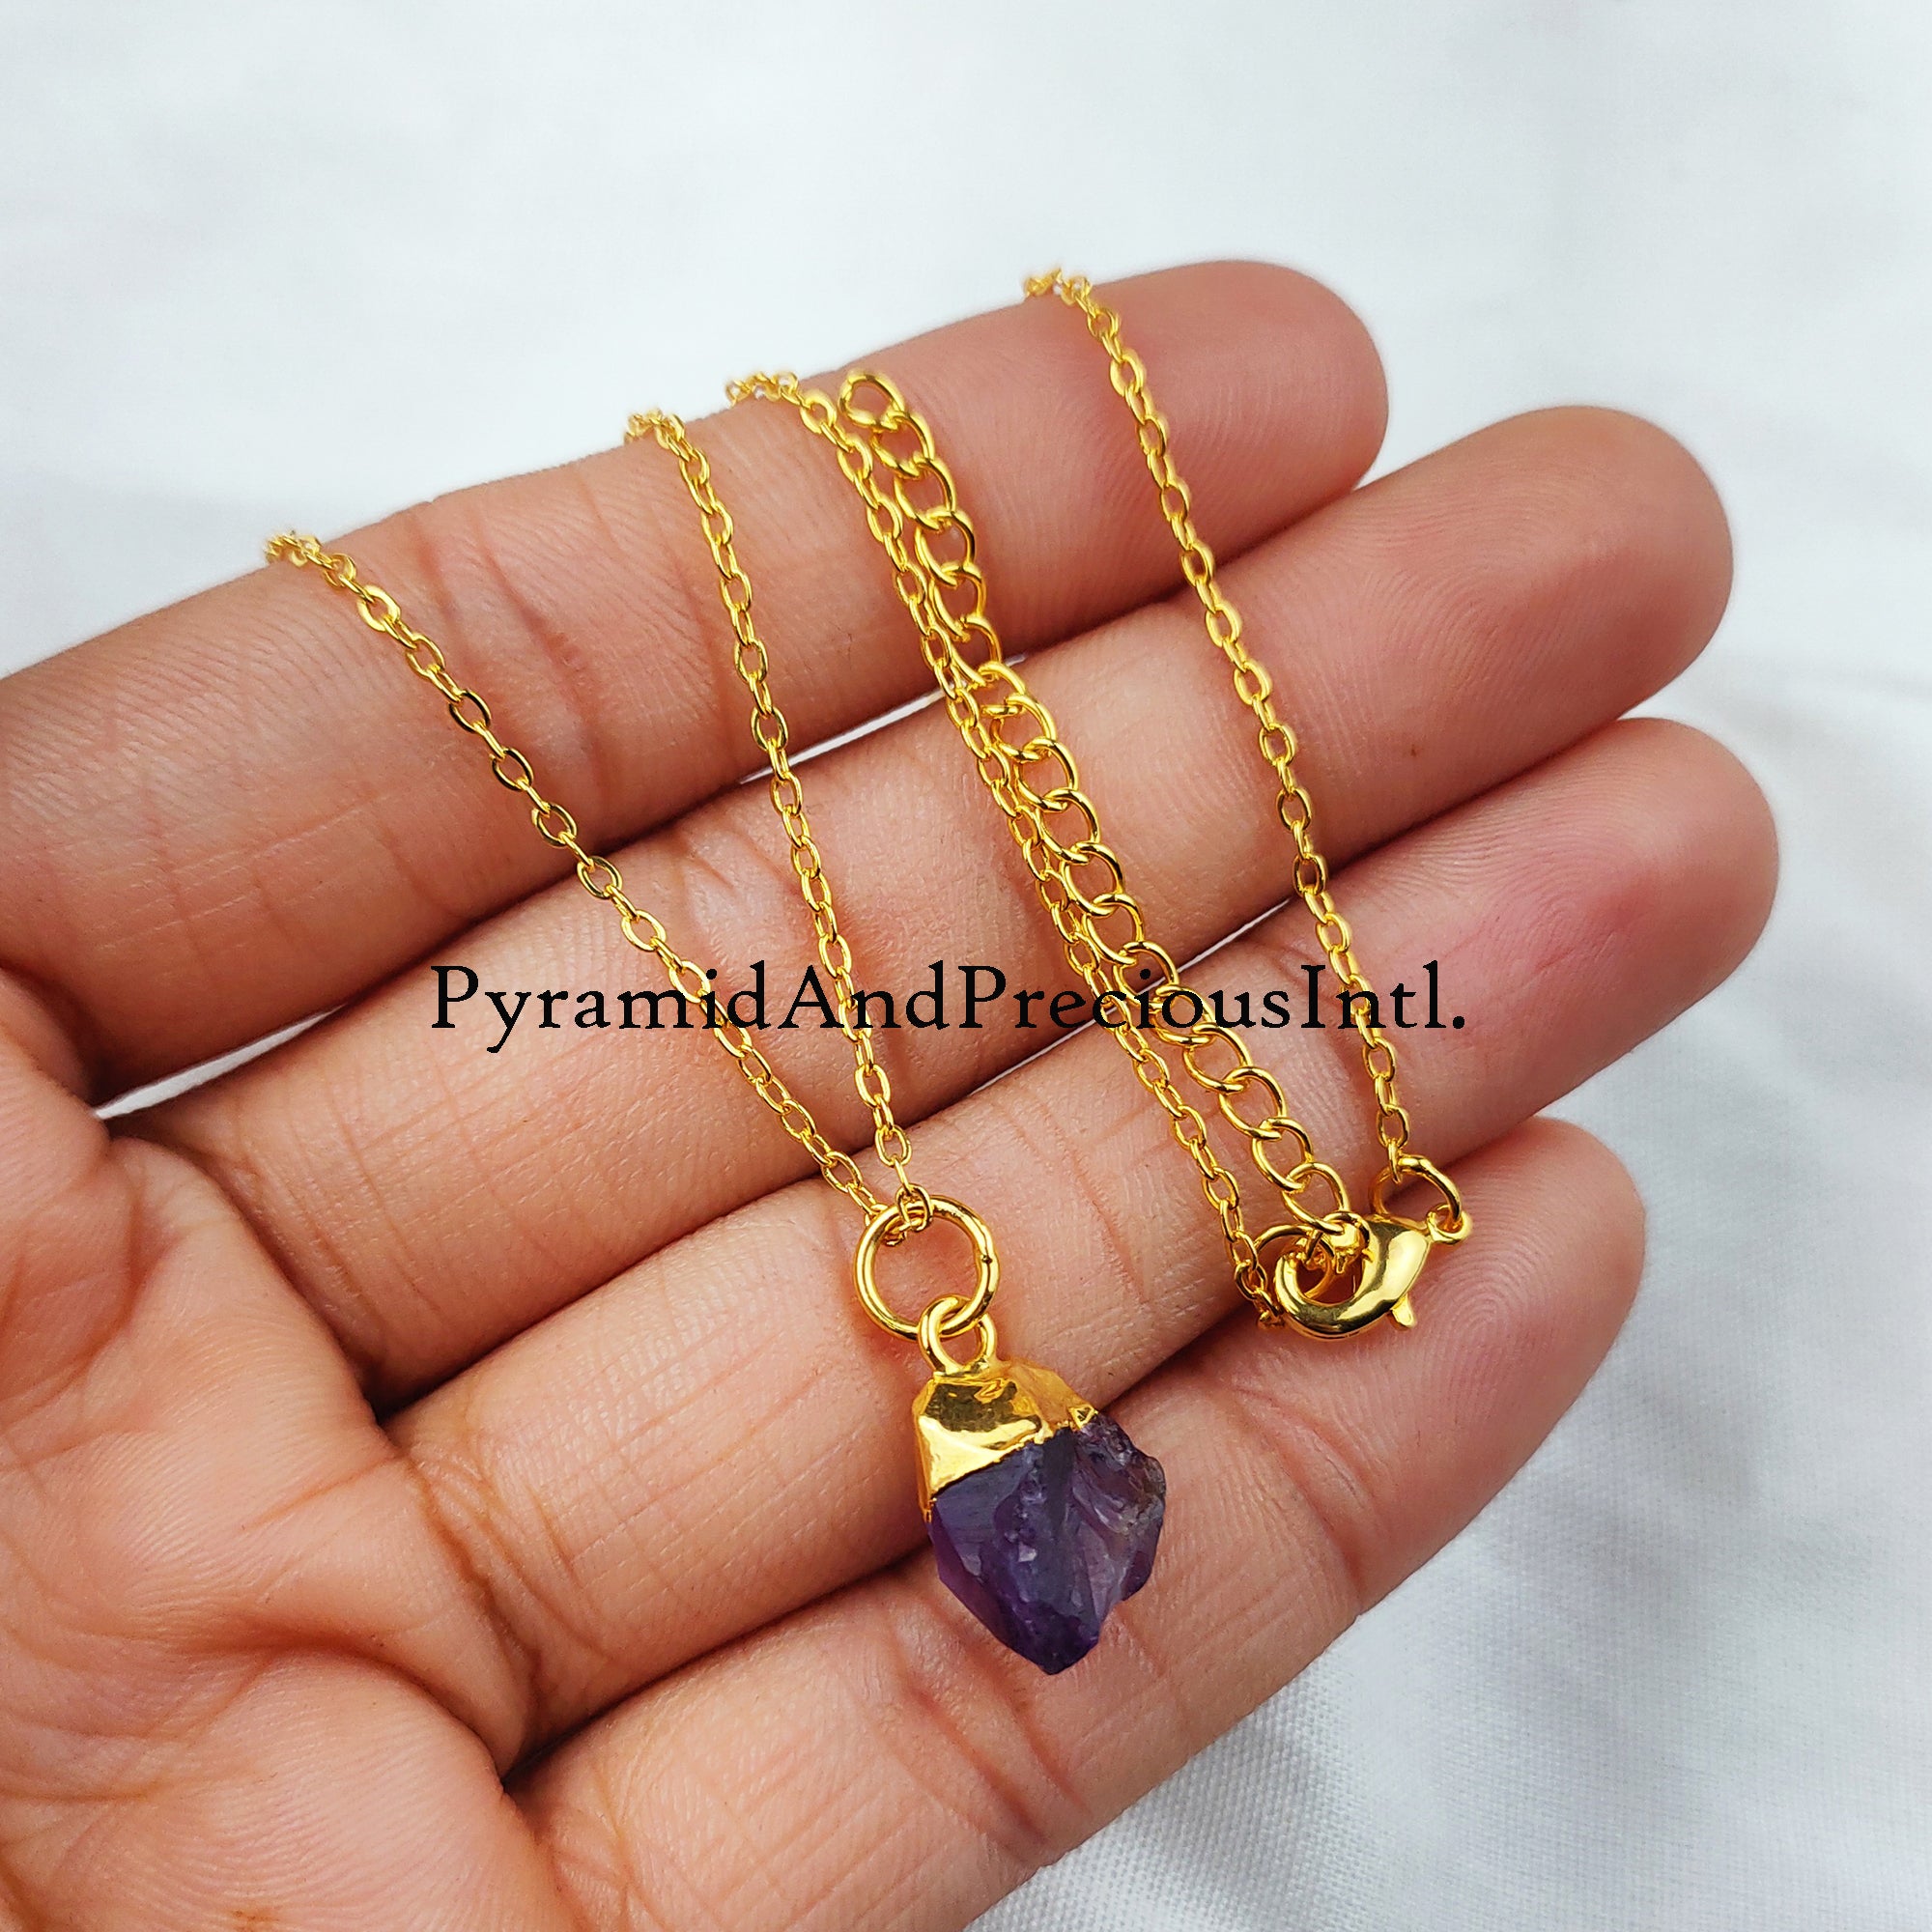 Raw Amethyst necklace, Gold Plated Necklace, Amethyst crystal necklace, rough Amethyst necklace